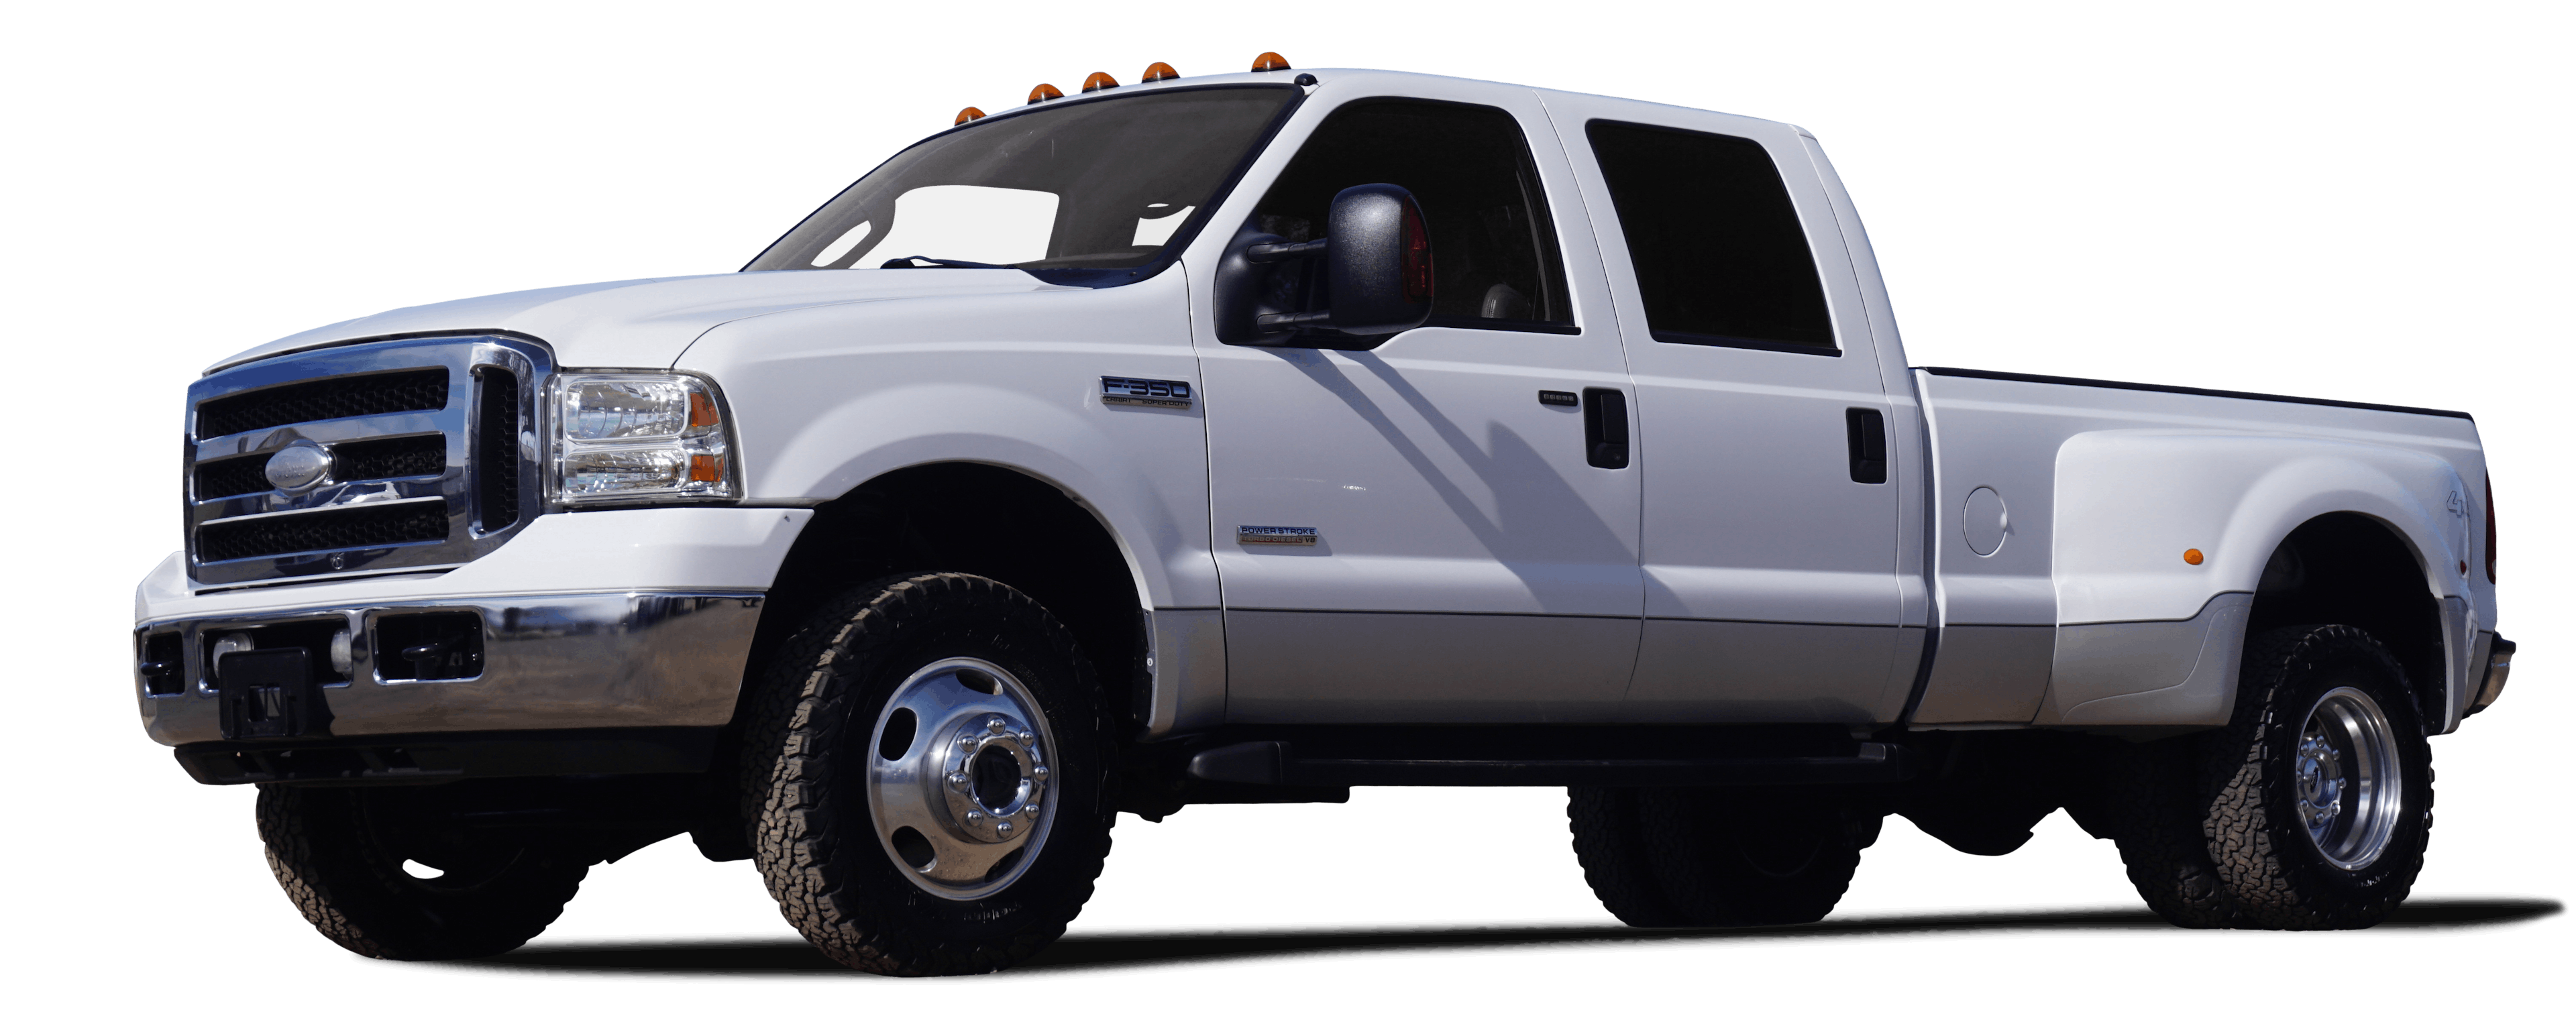 2006 Ford F350